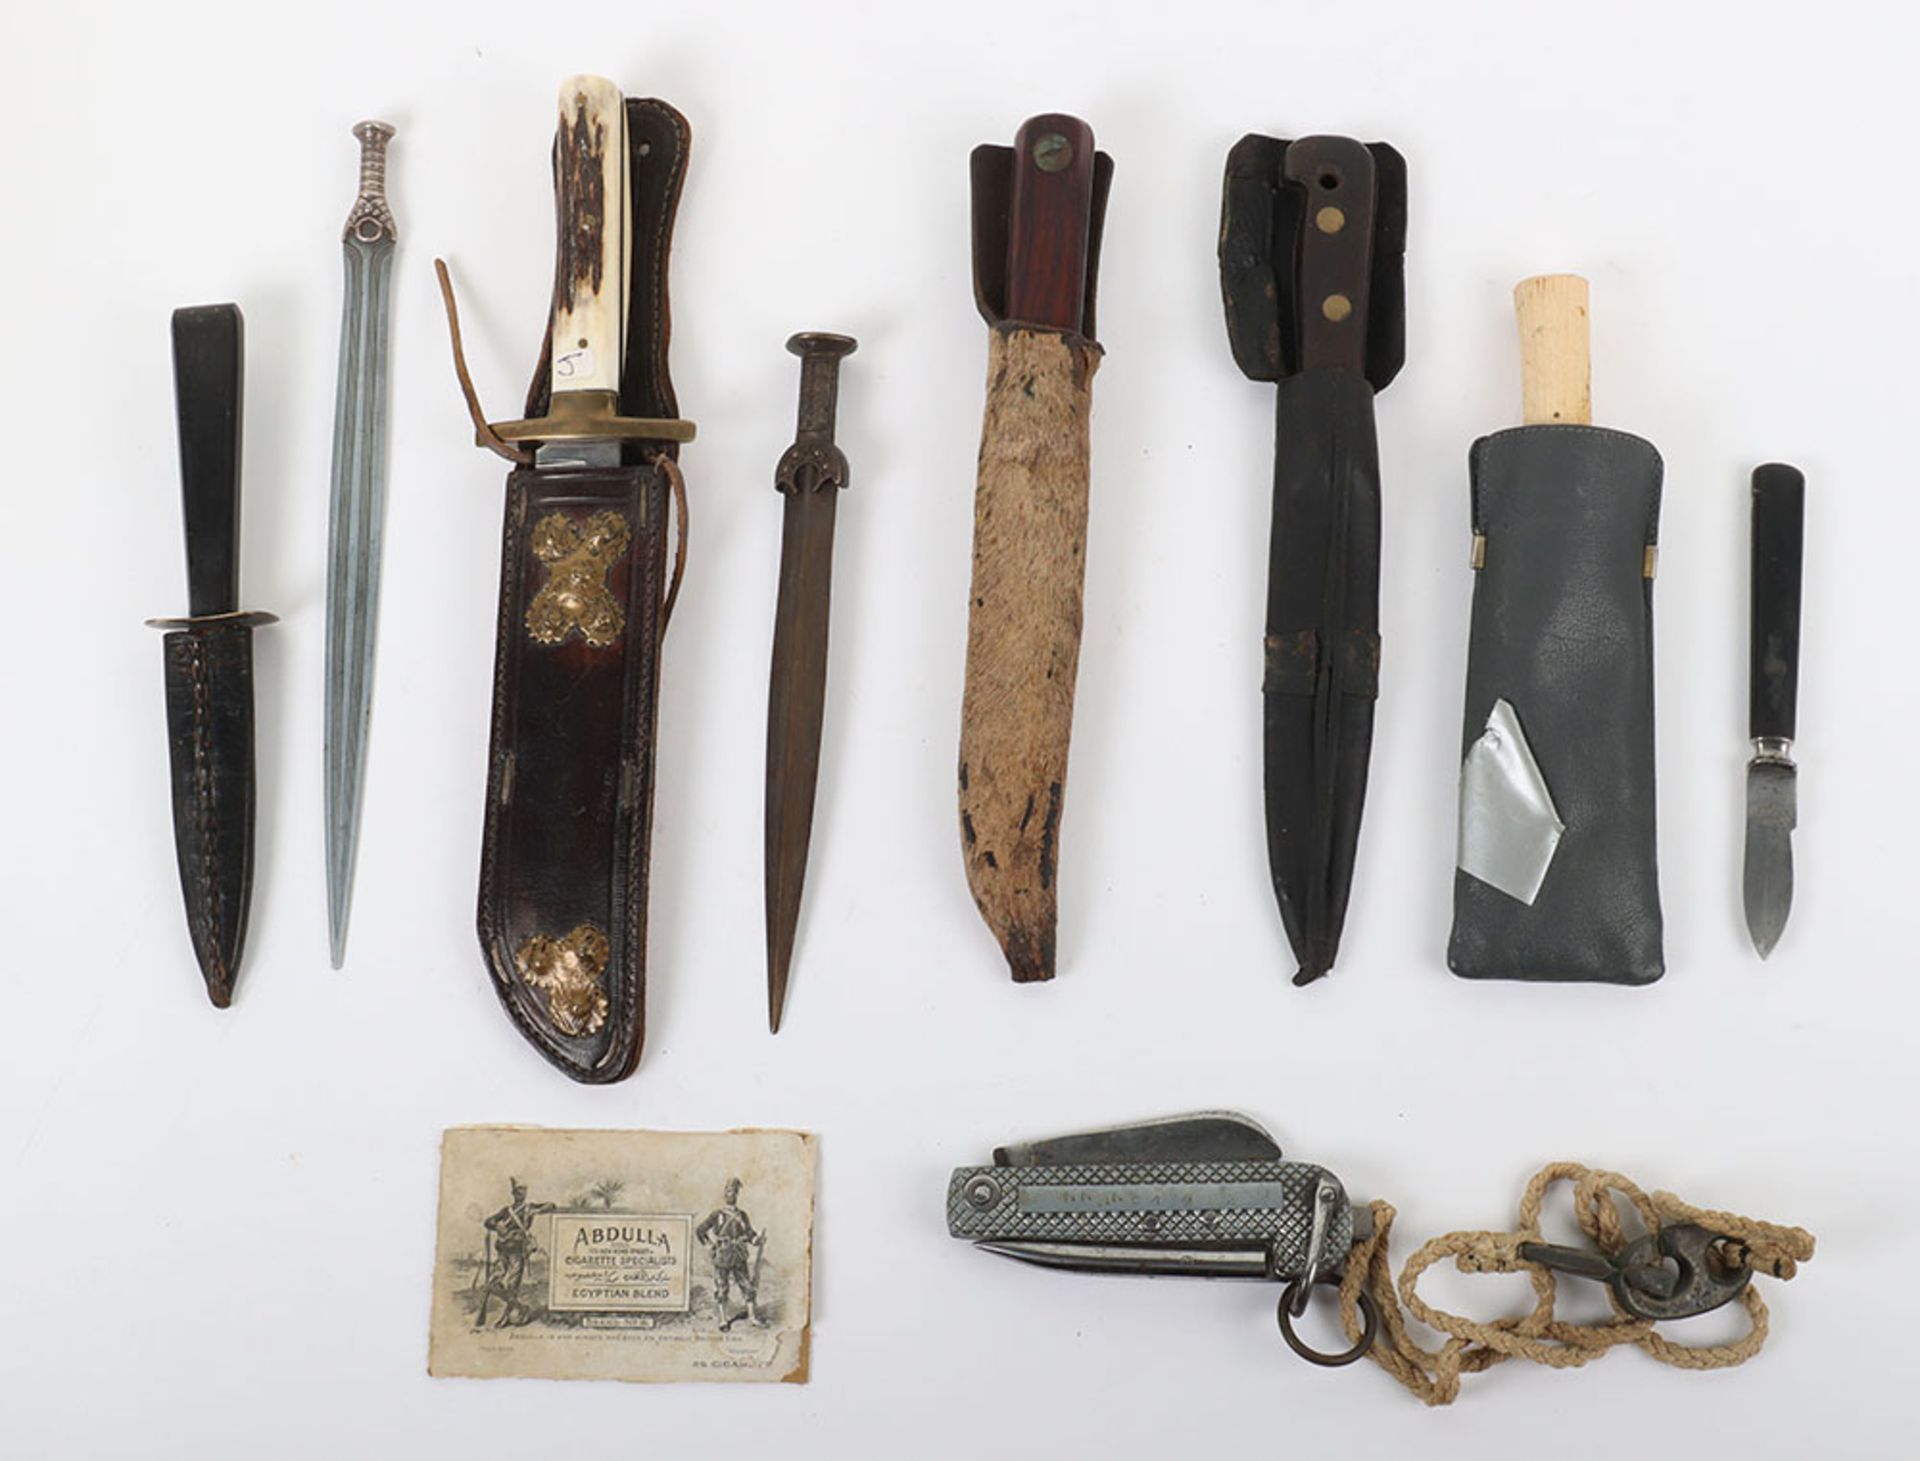 A selection of nine knives